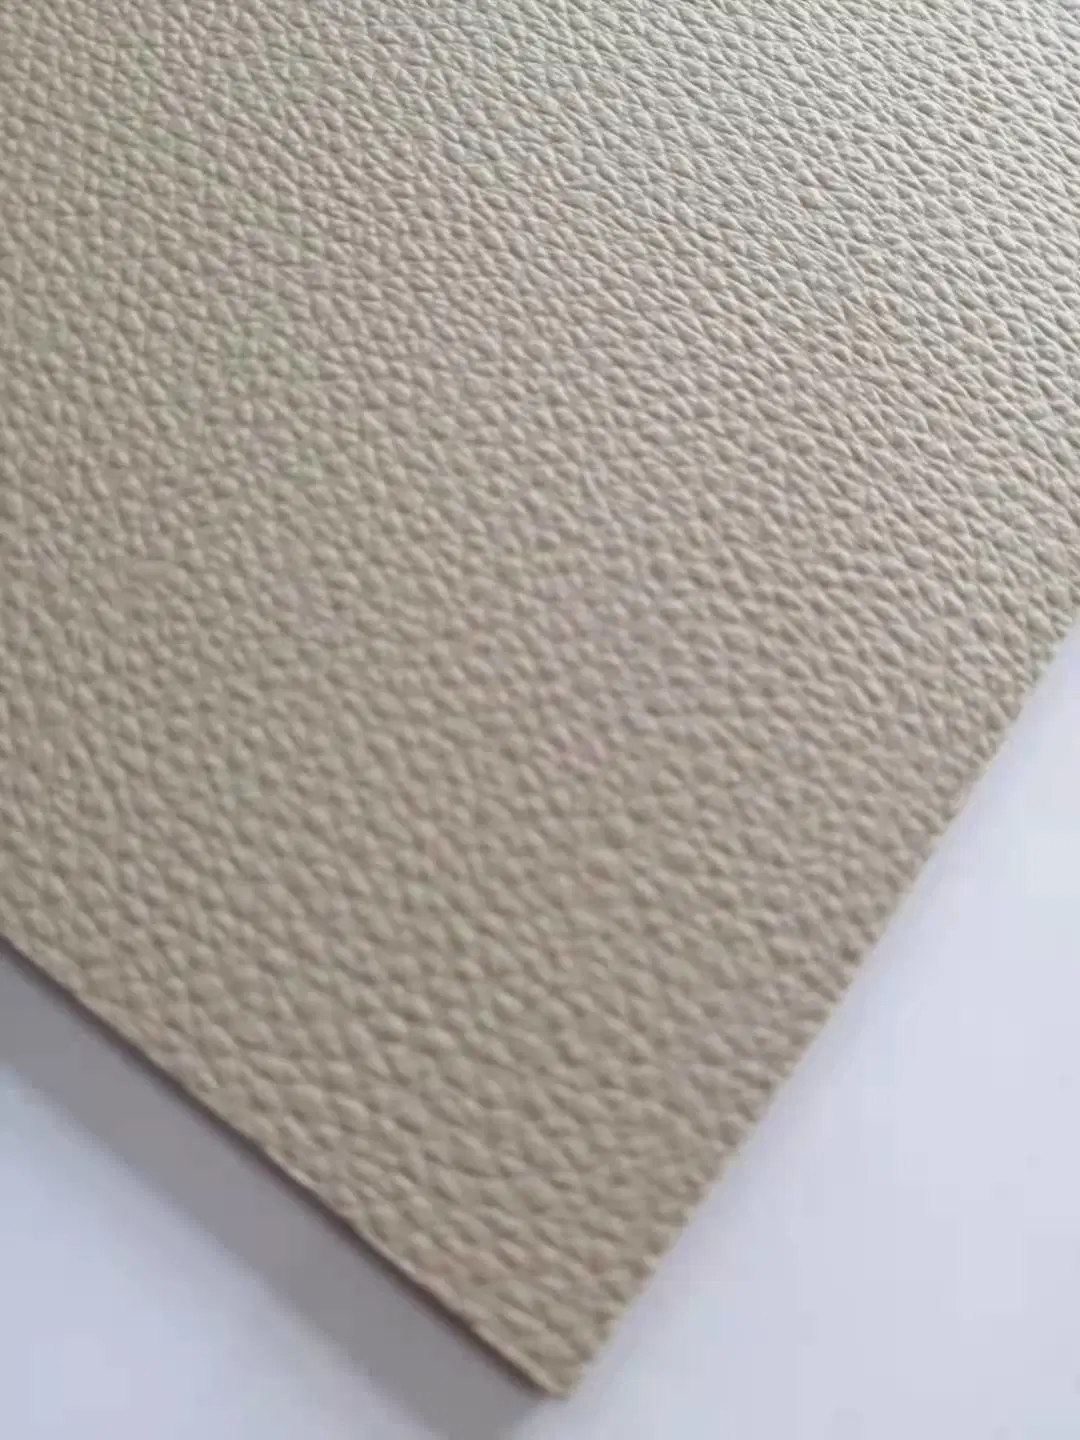 PVC/ABS Leather Plastic Sheet for Vacuum Forming, Thermoforming, Auto Interior Decoration